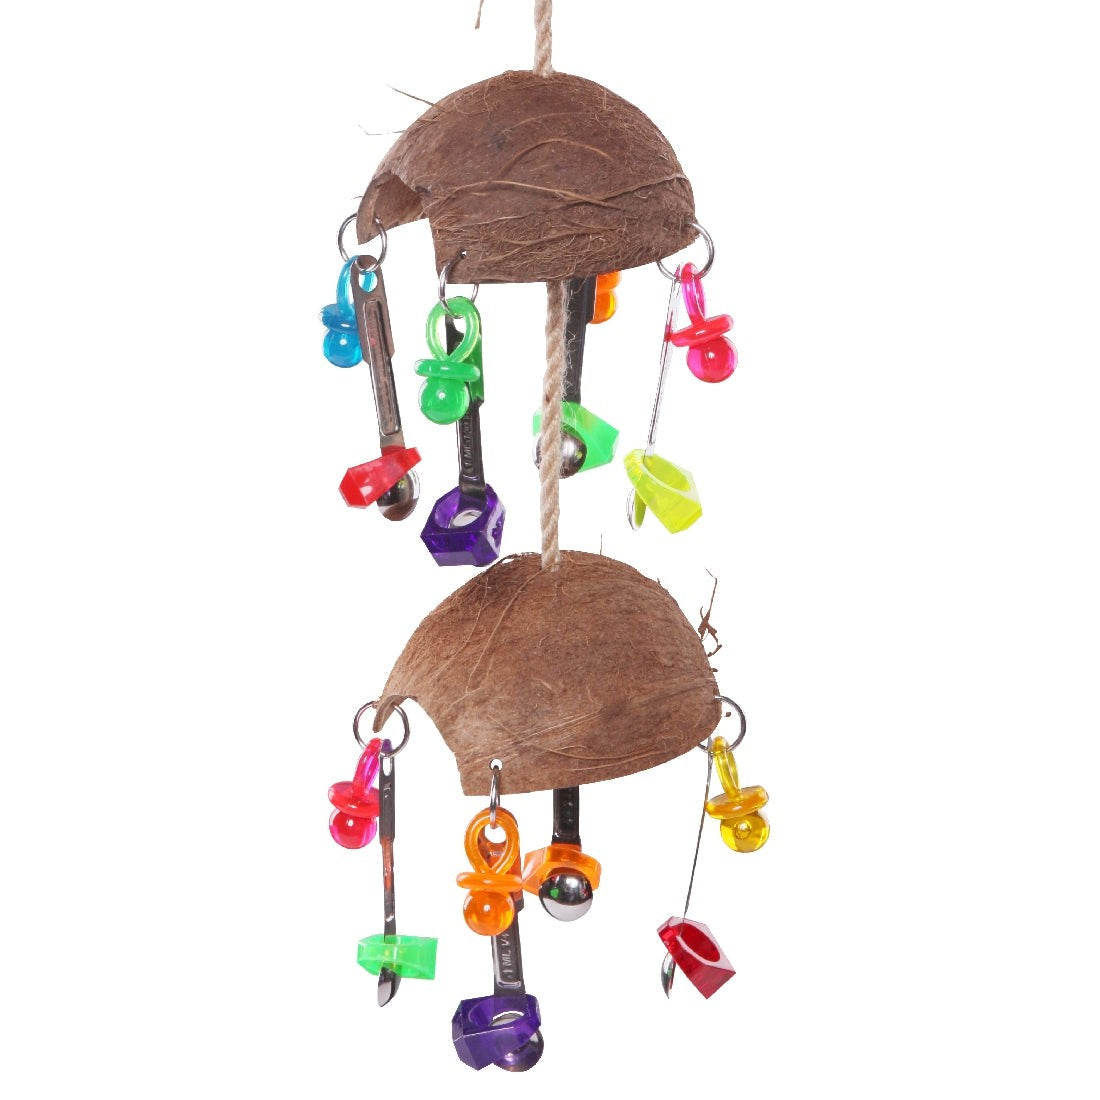 Alt: Colorful bird toy with coconut shells and hanging plastic beads.